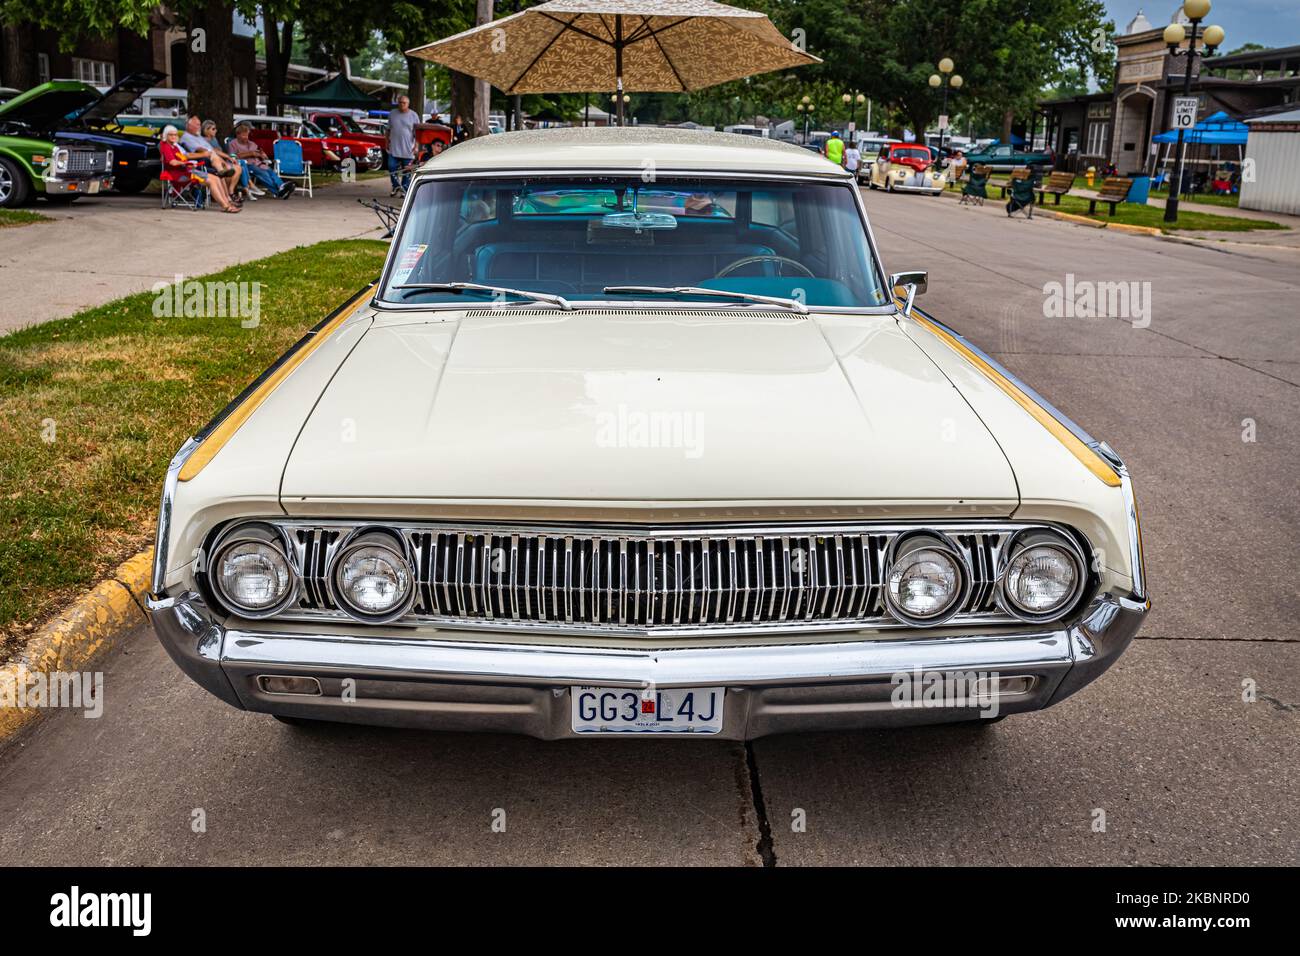 Des Moines, IA - July 01, 2022: High perspective front view of a 1964 Mercury Colony Park Station Wagon at a local car show. Stock Photo